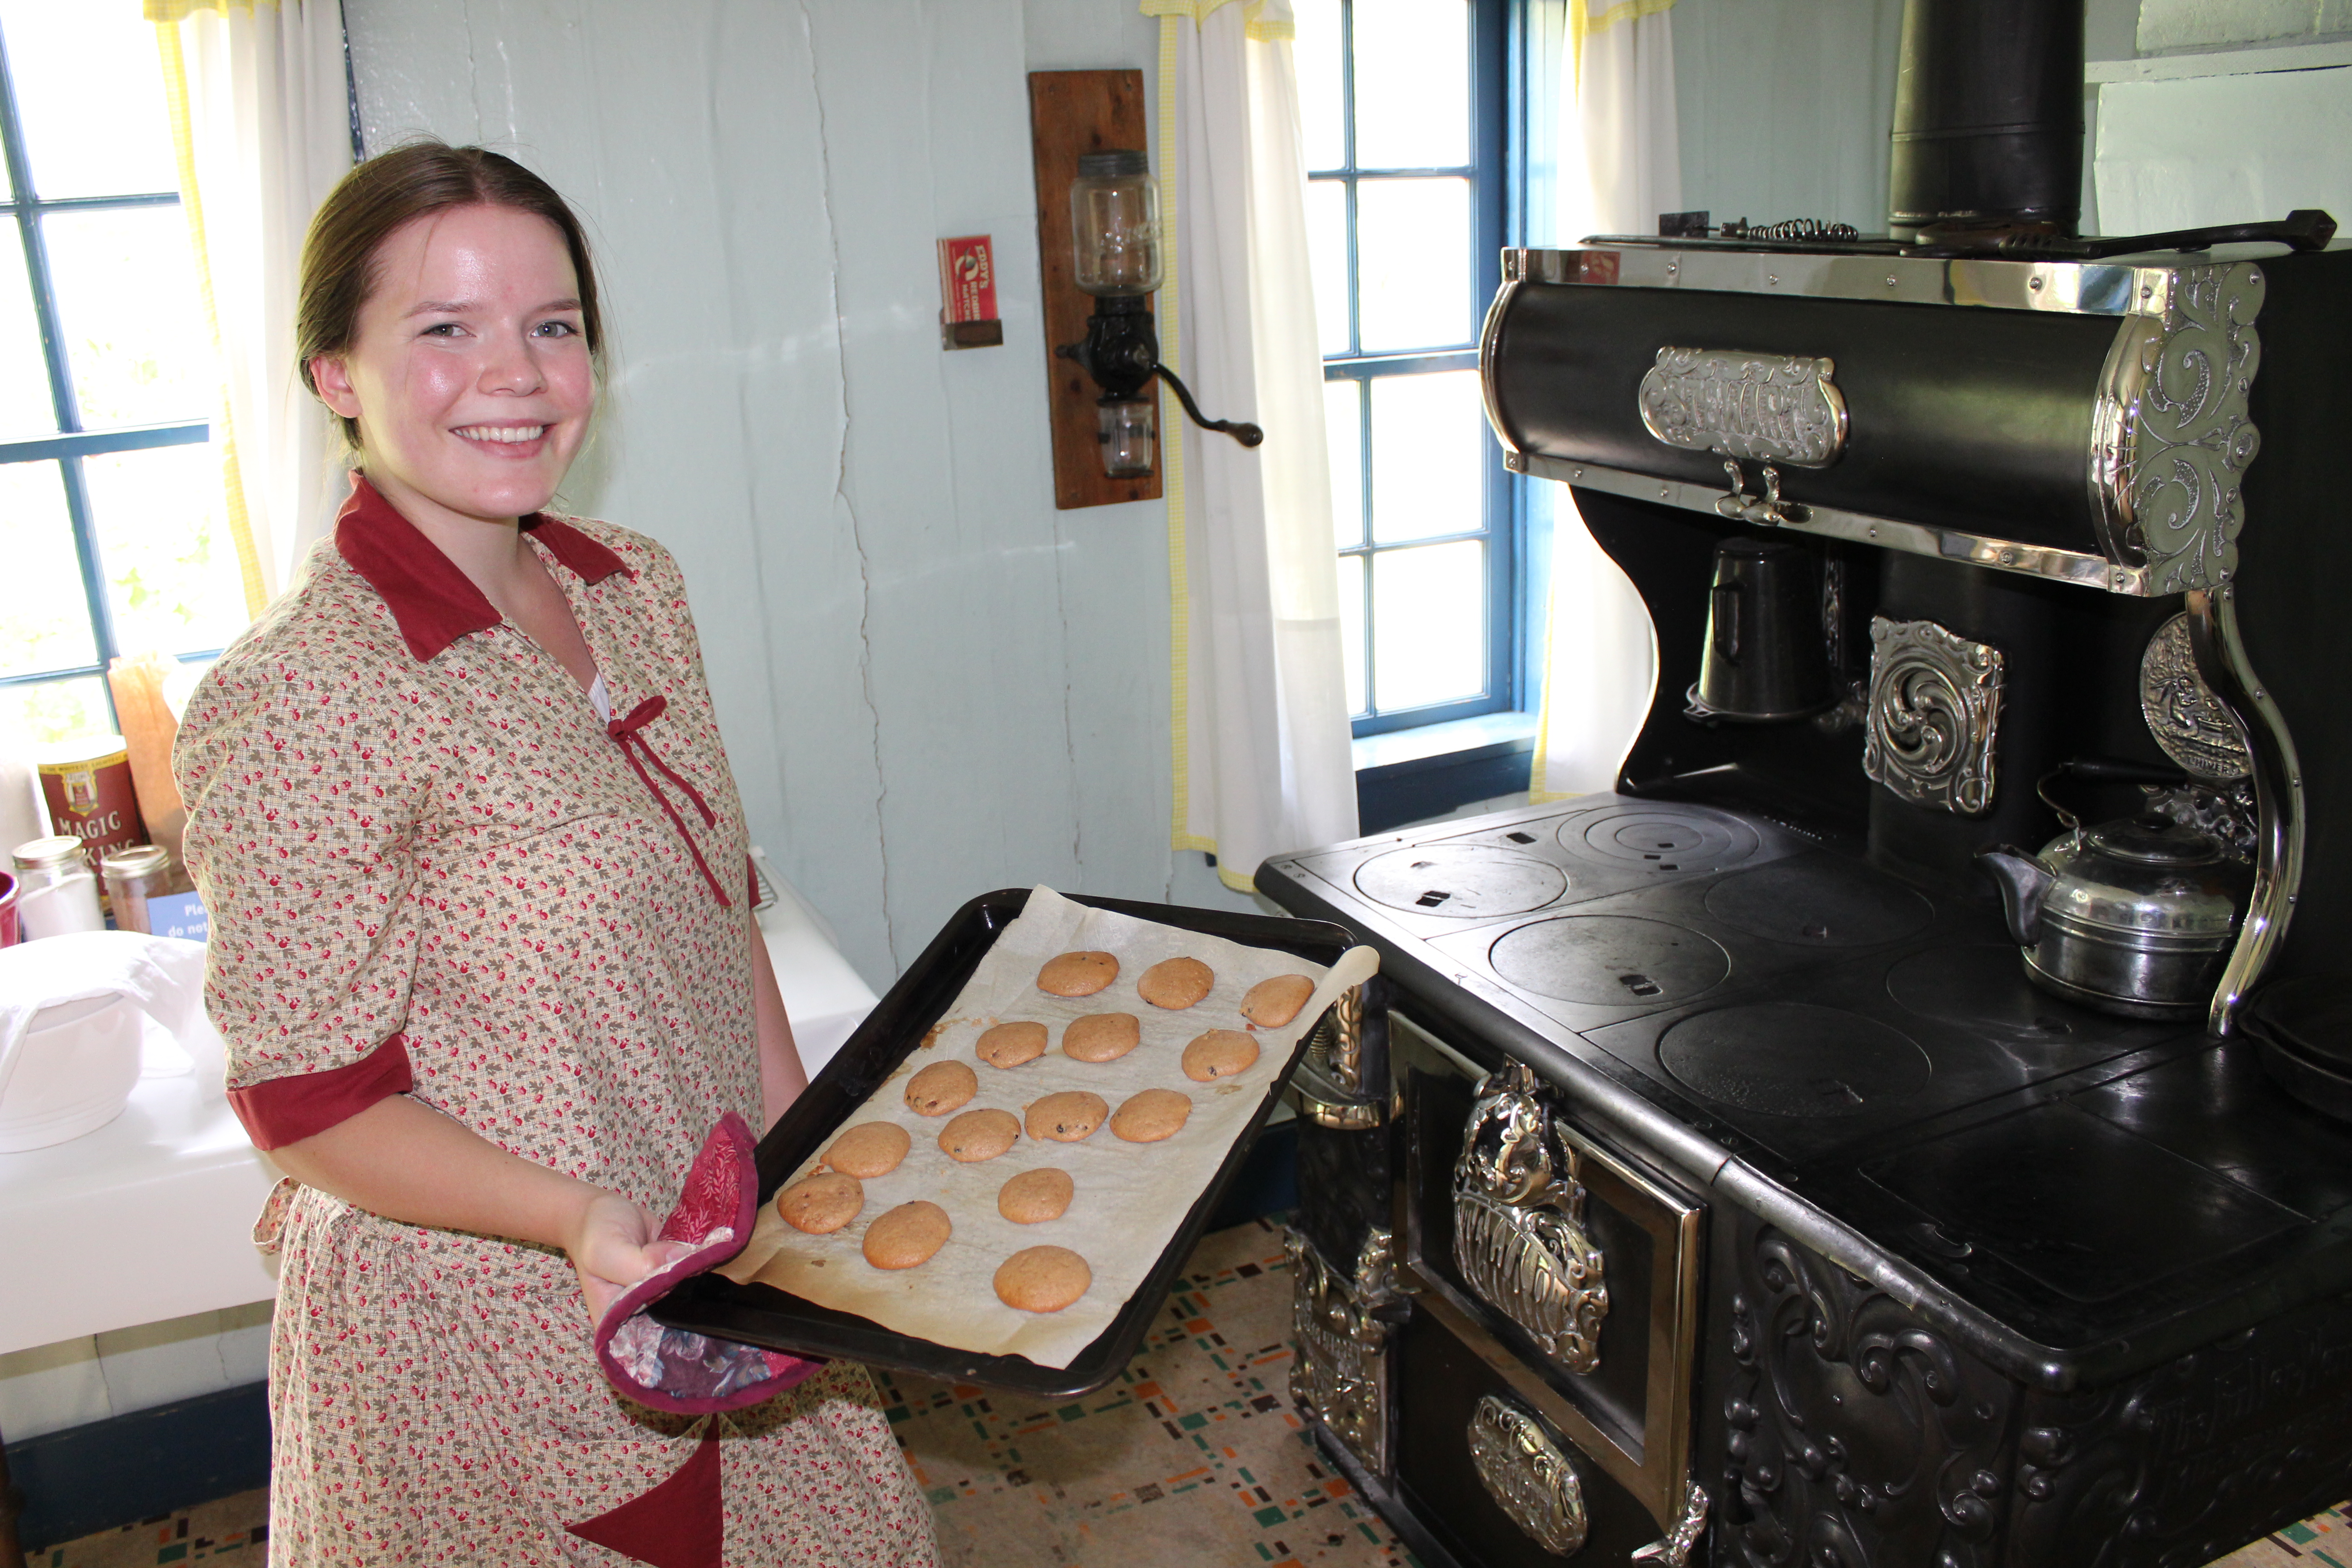 A staff member in 1920s costume takes a tray of cookies out of an old-fashioned wood-burning oven.